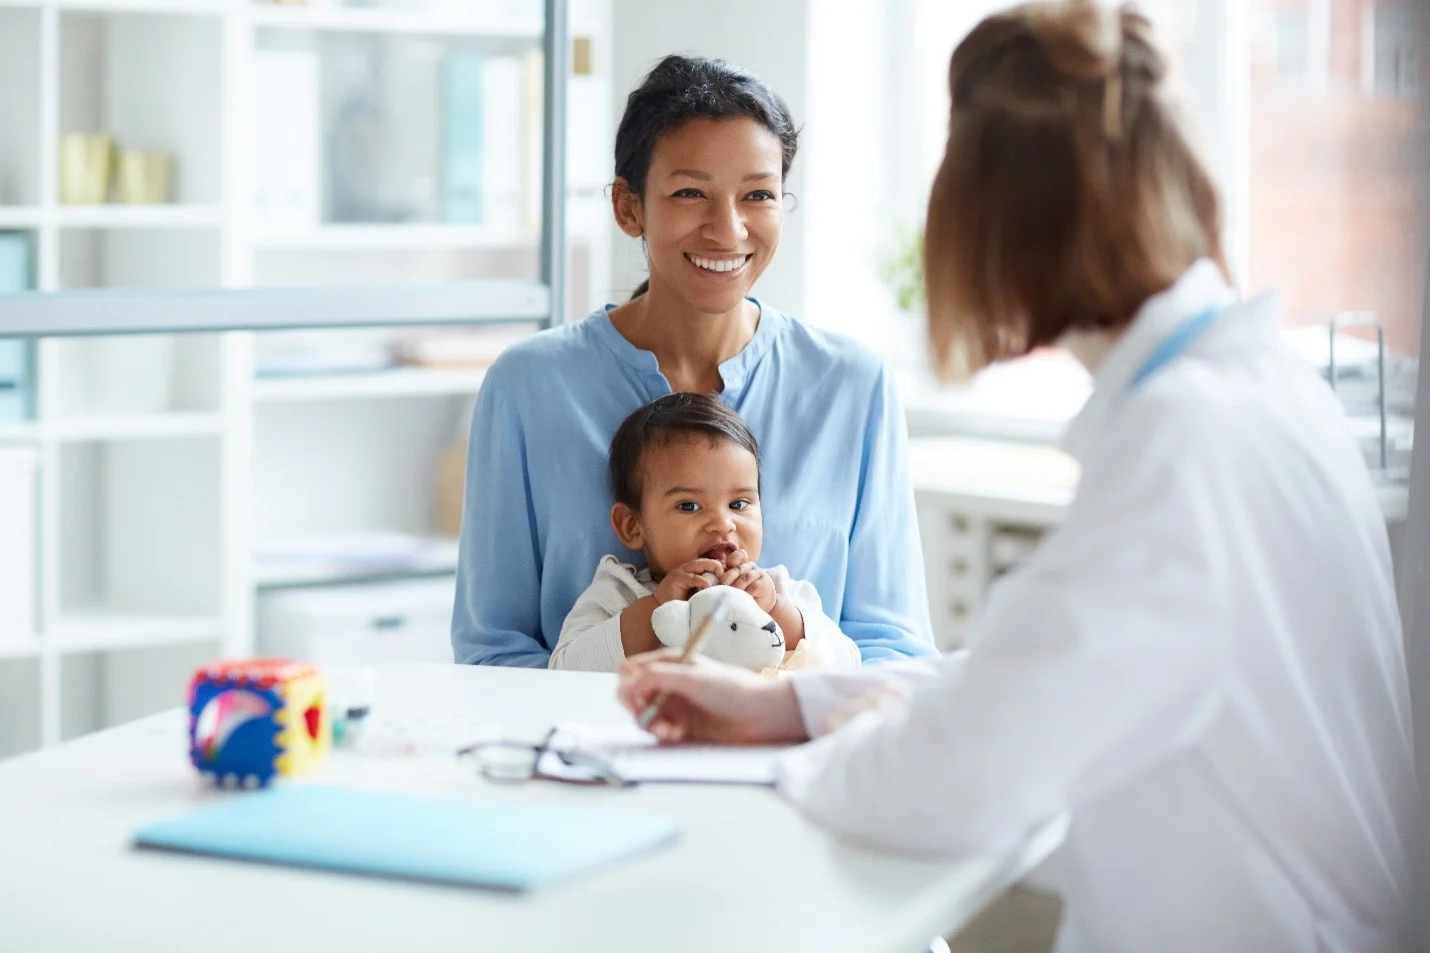 Woman with young child at doctor's appointment